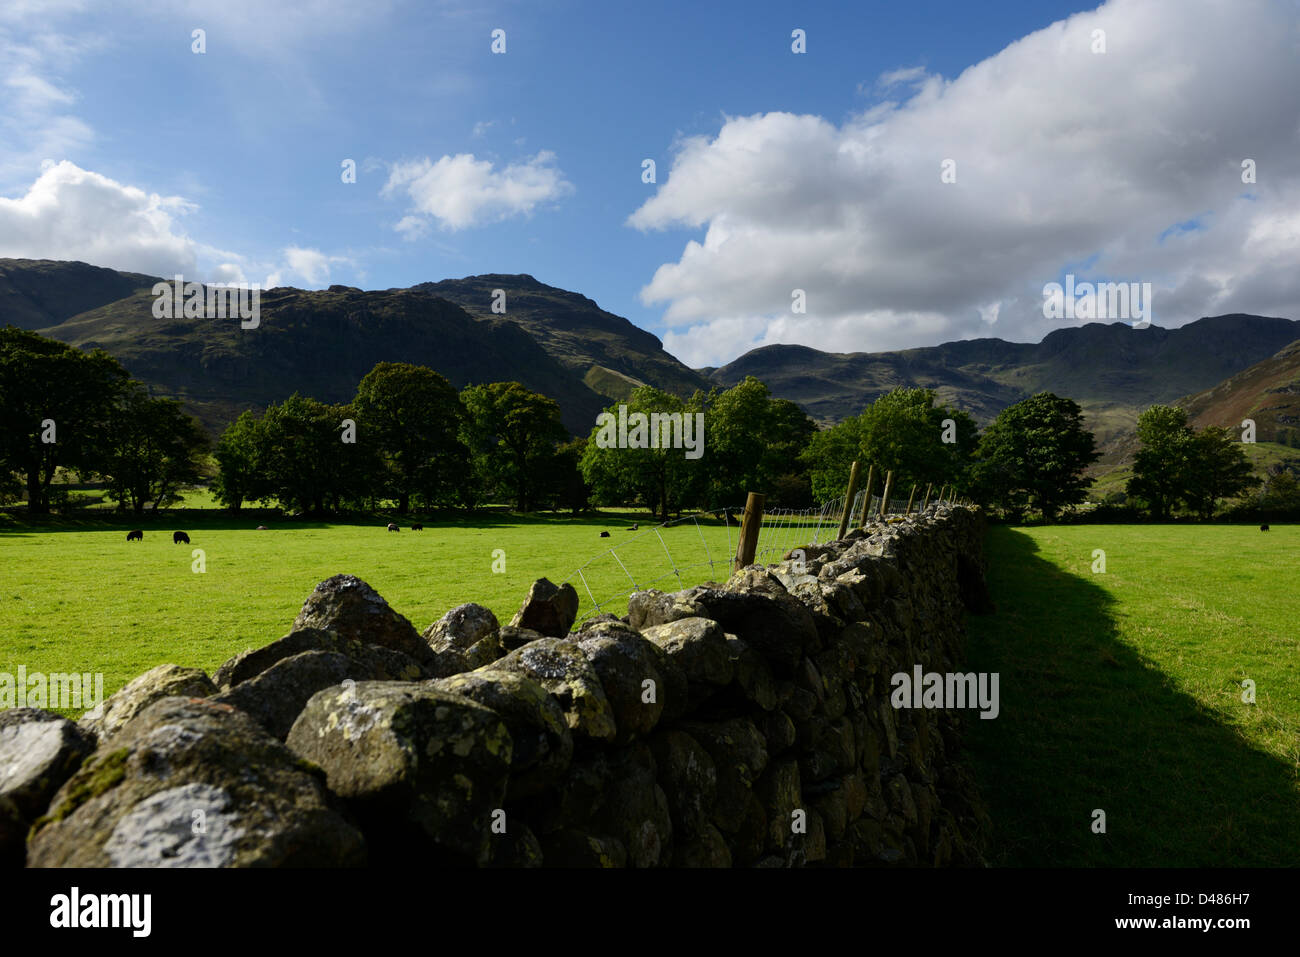 Oxendale und Crinkle Crags, Great Langdale Tal, The Lake District, Cumbria, England, 36MPX, HI-RES Stockfoto